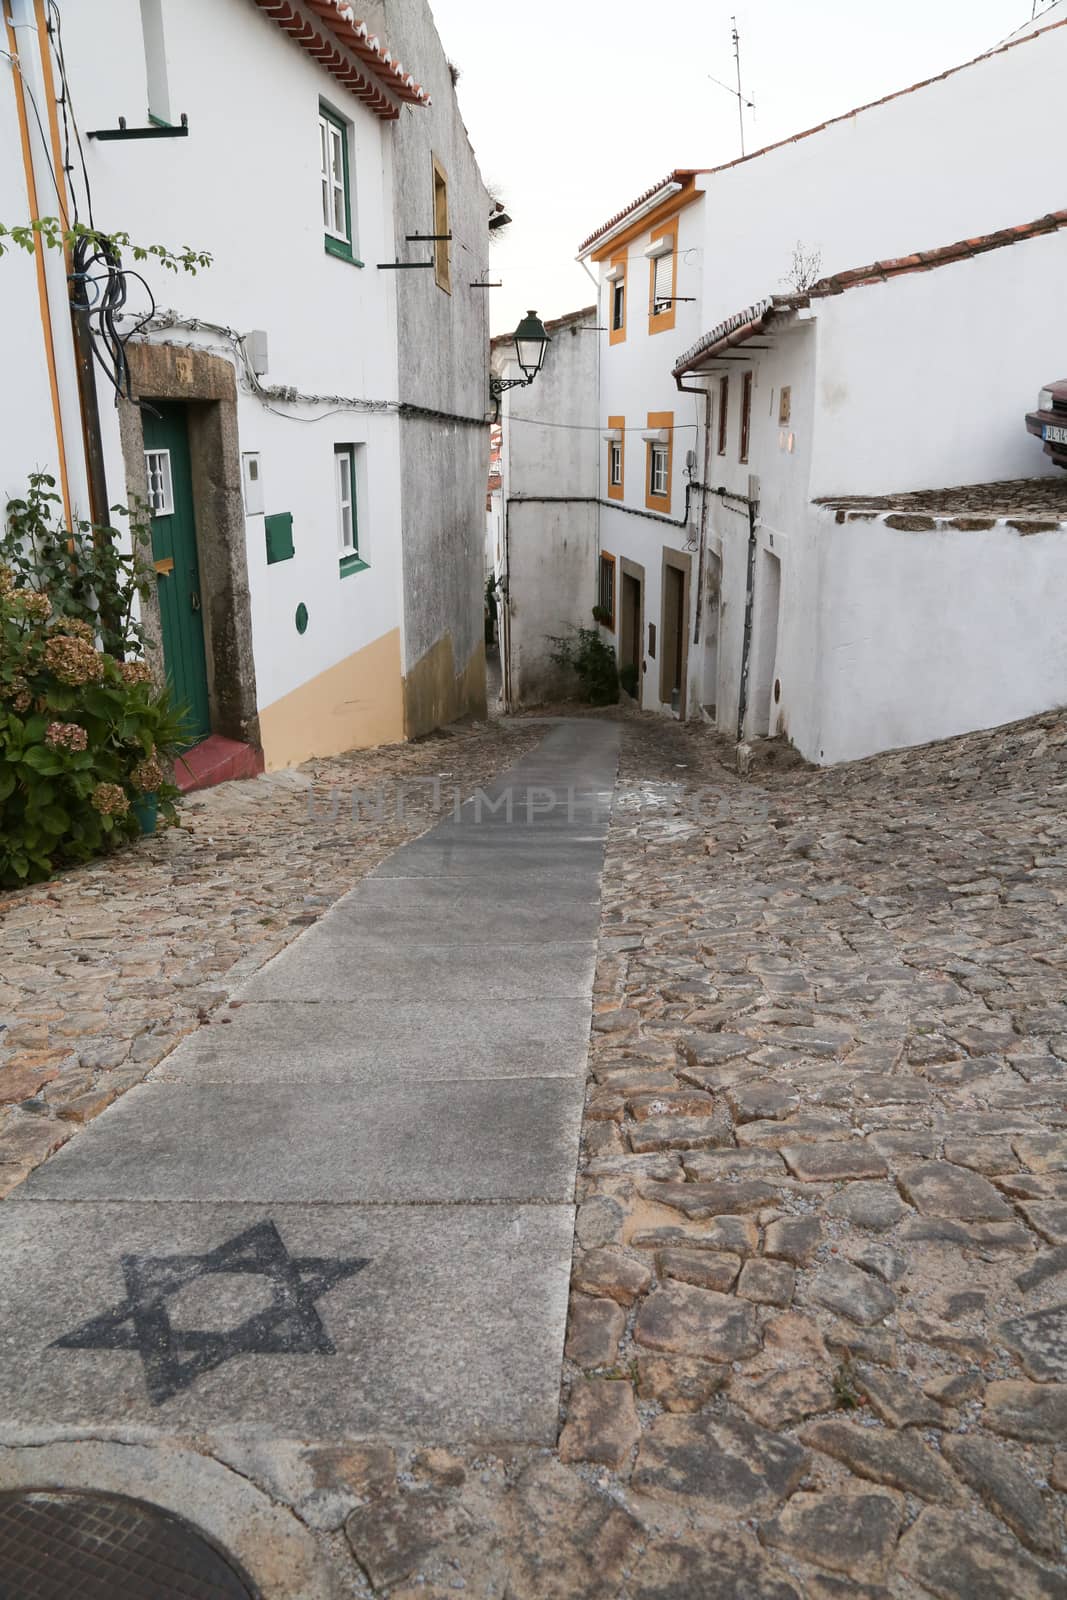 The narrow streets of the village of Castelo de Vide in Portugal